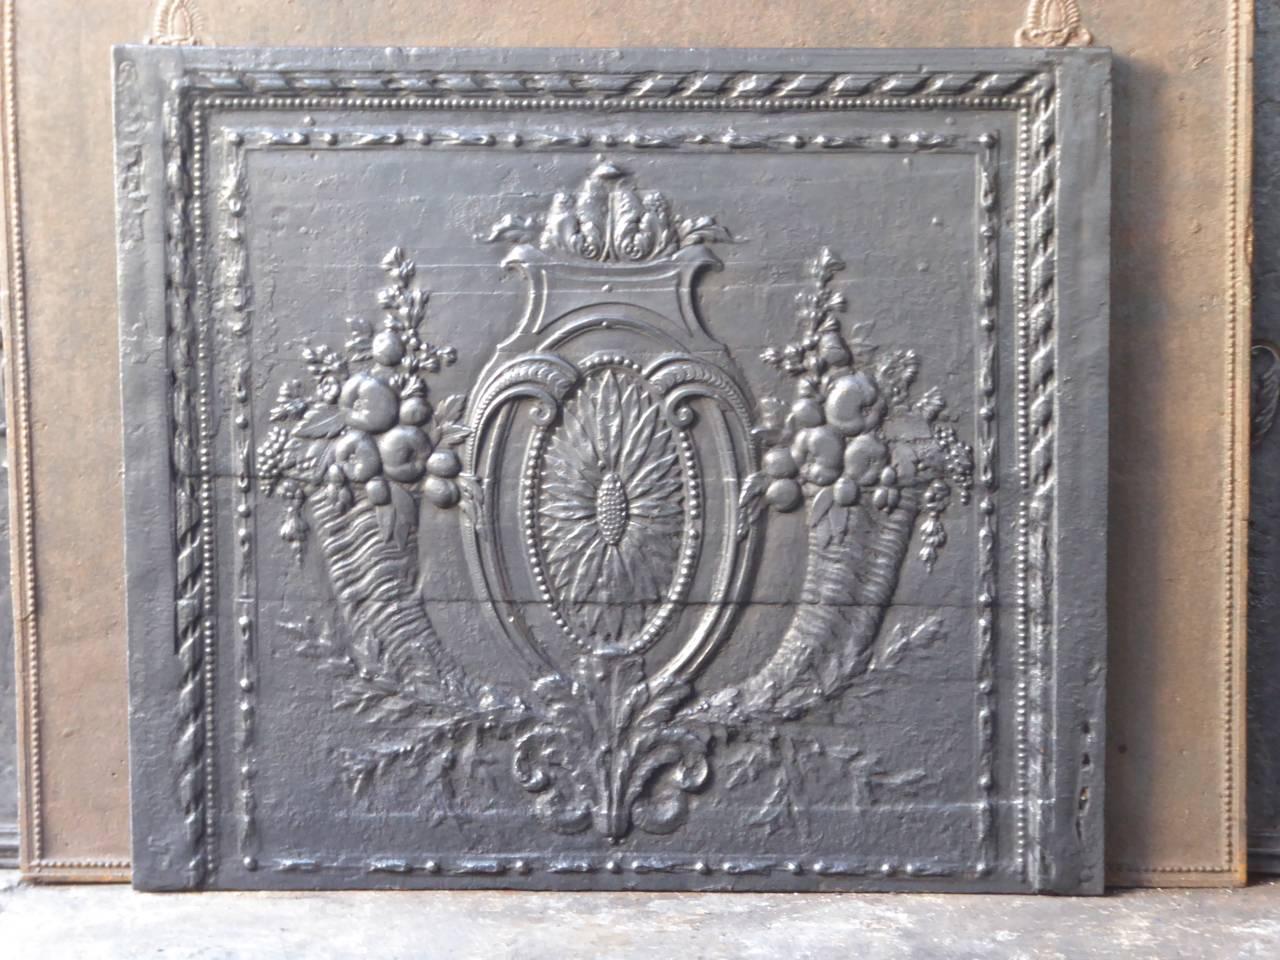 18th century French 'Fruits of the Summer' fireplace fireback. With two horns of plenty, a sunflower and other greenery.

We have a unique and specialized collection of antique and used fireplace accessories consisting of more than 1000 listings at